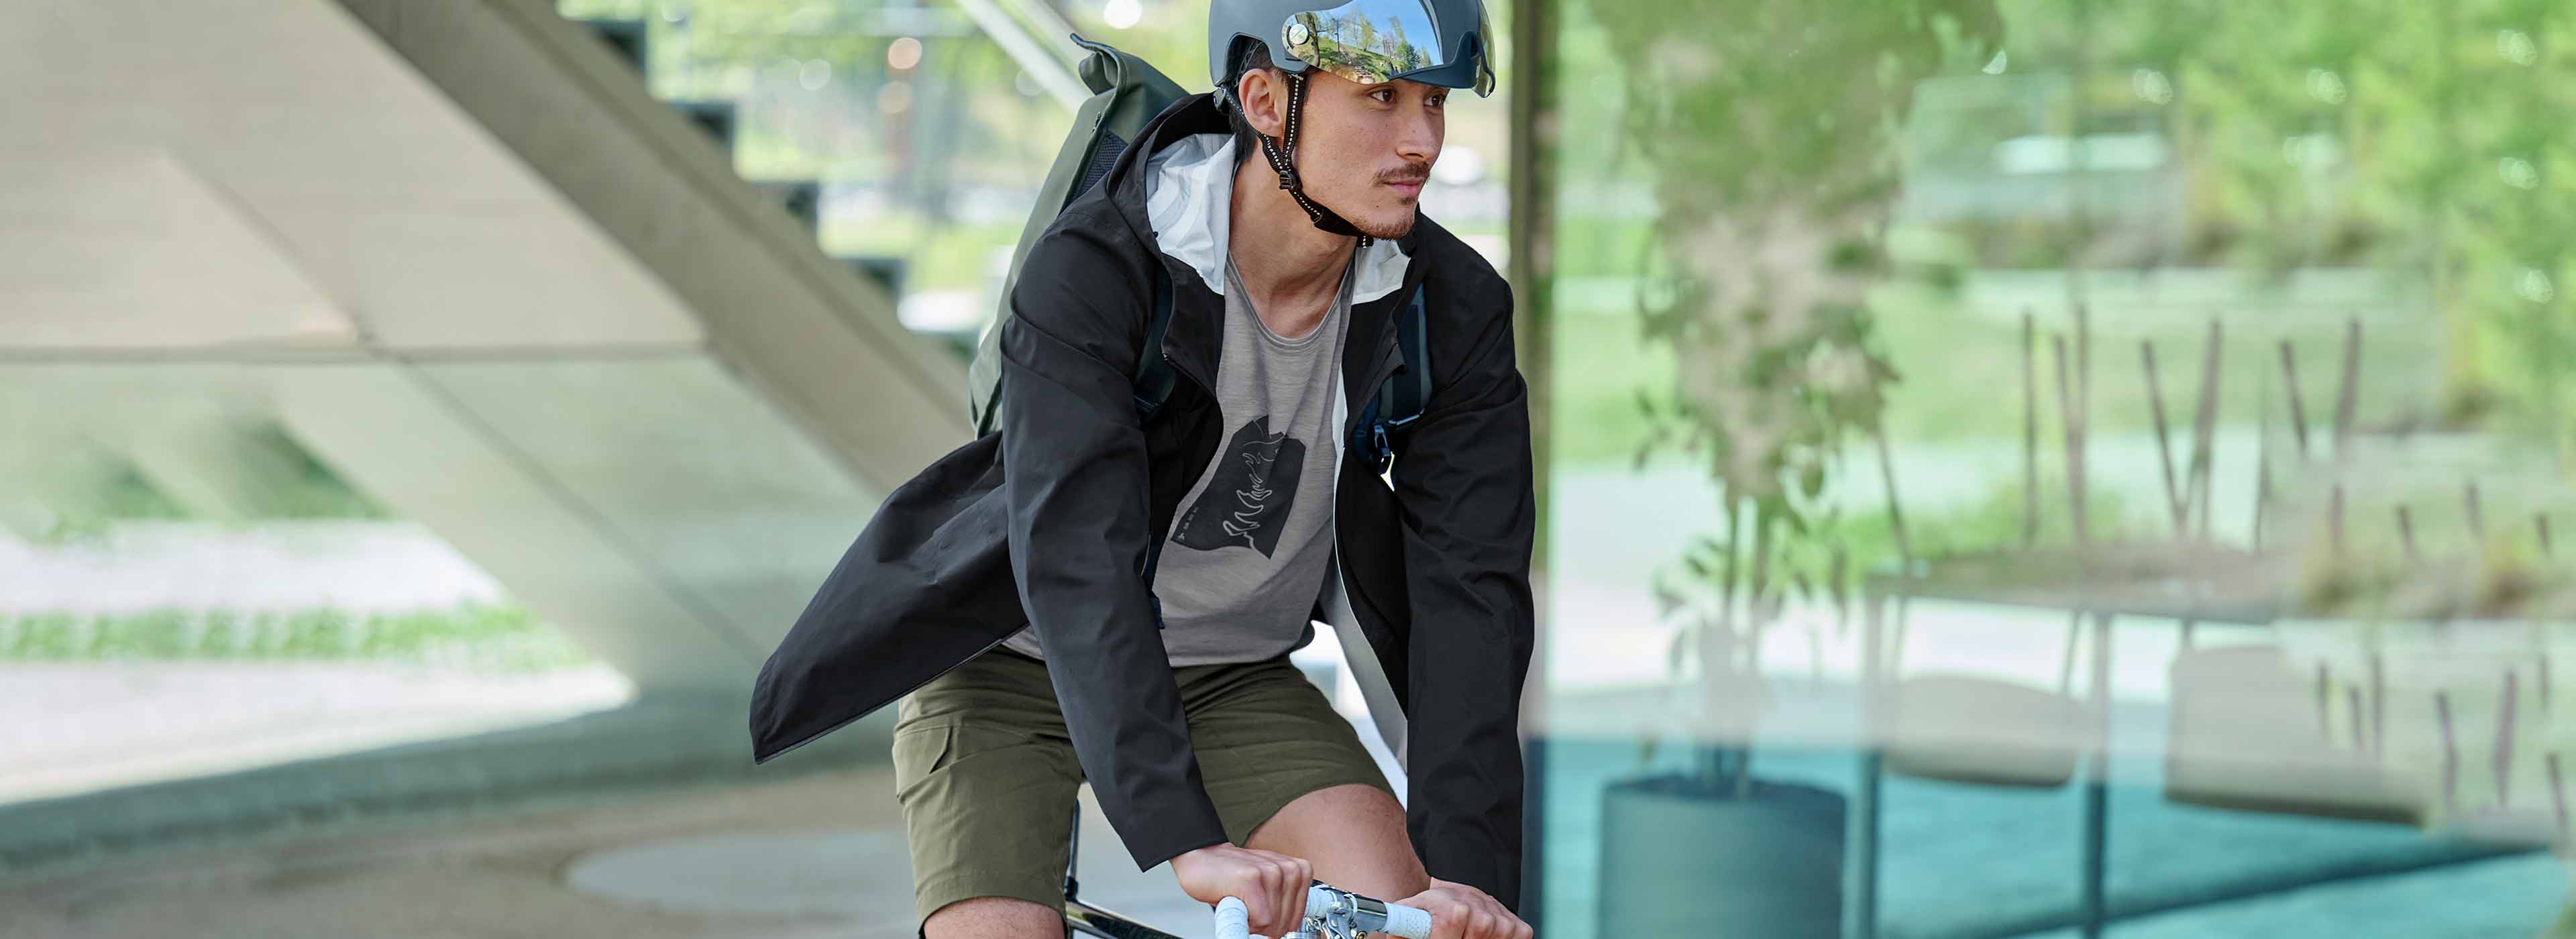 a man on a city bike, wearing a t-shirt and jacket designed for bike commuting